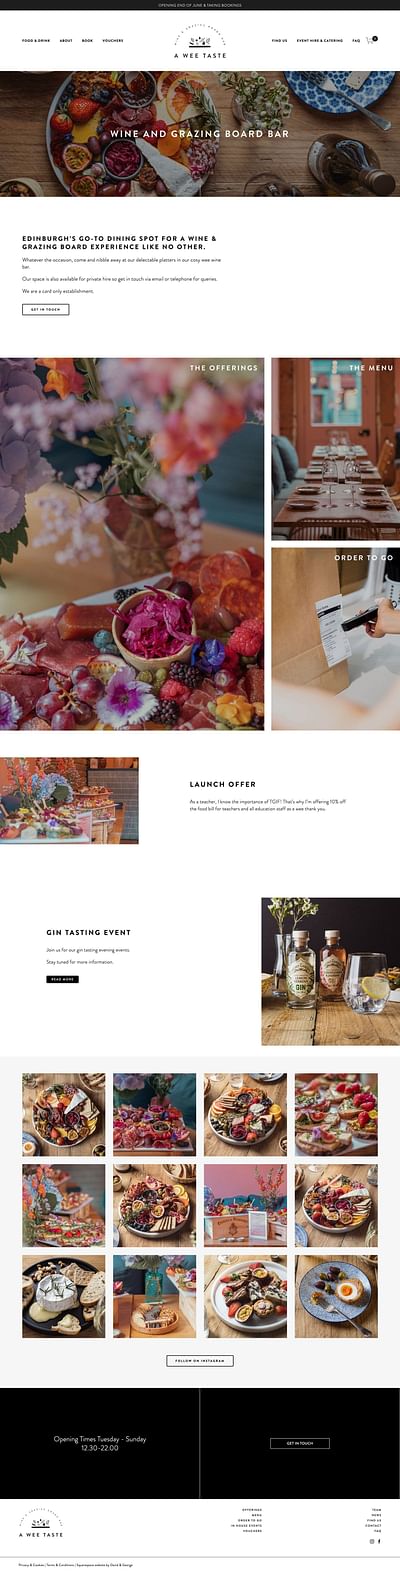 New Squarespace Website for A Wee Taste - E-commerce